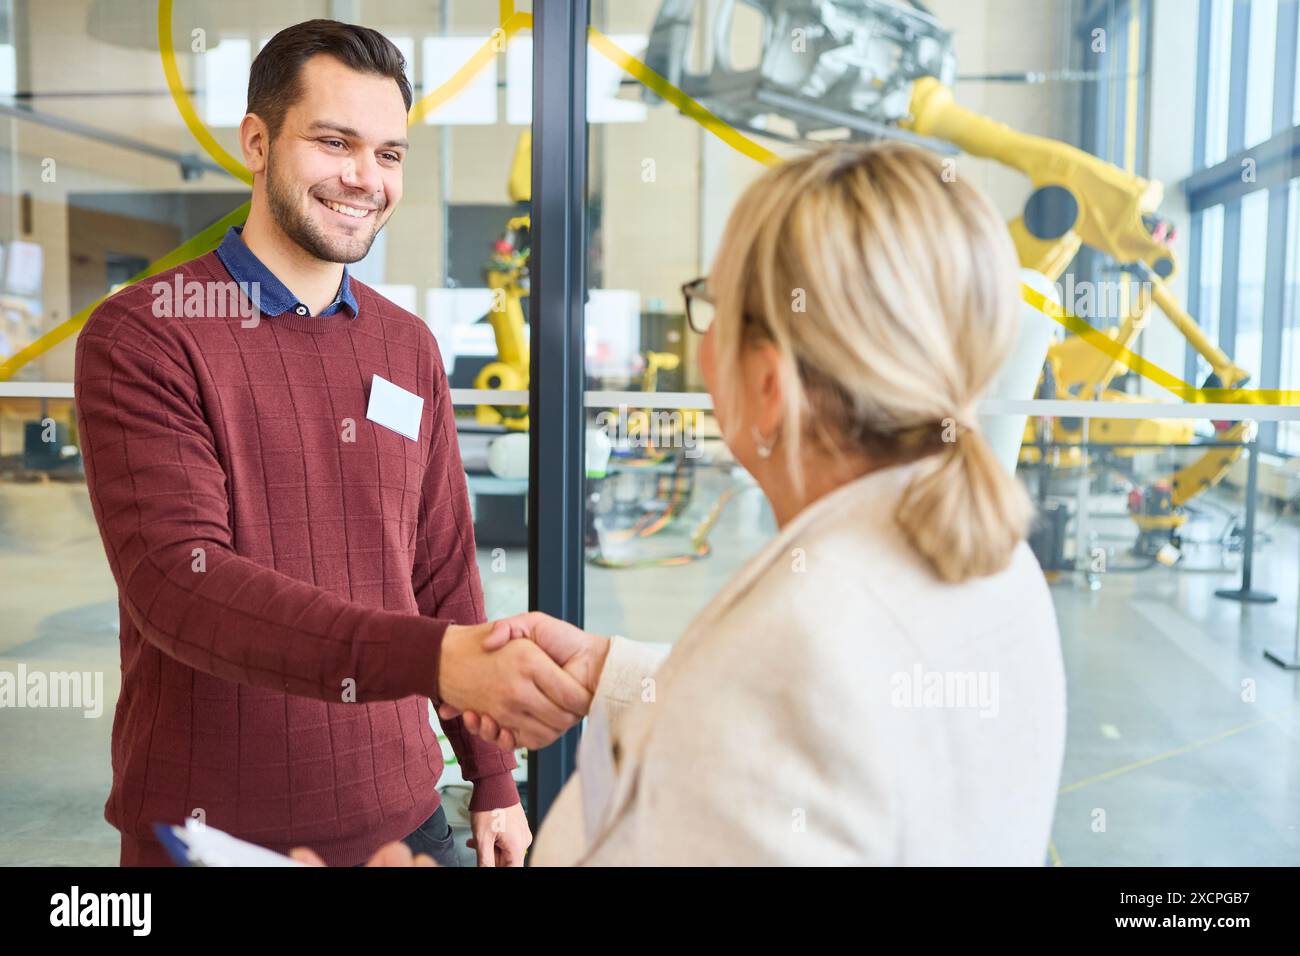 Business professionals shaking hands at a robotics training facility, highlighting technology and industrial automation. Background shows robotic arms Stock Photo